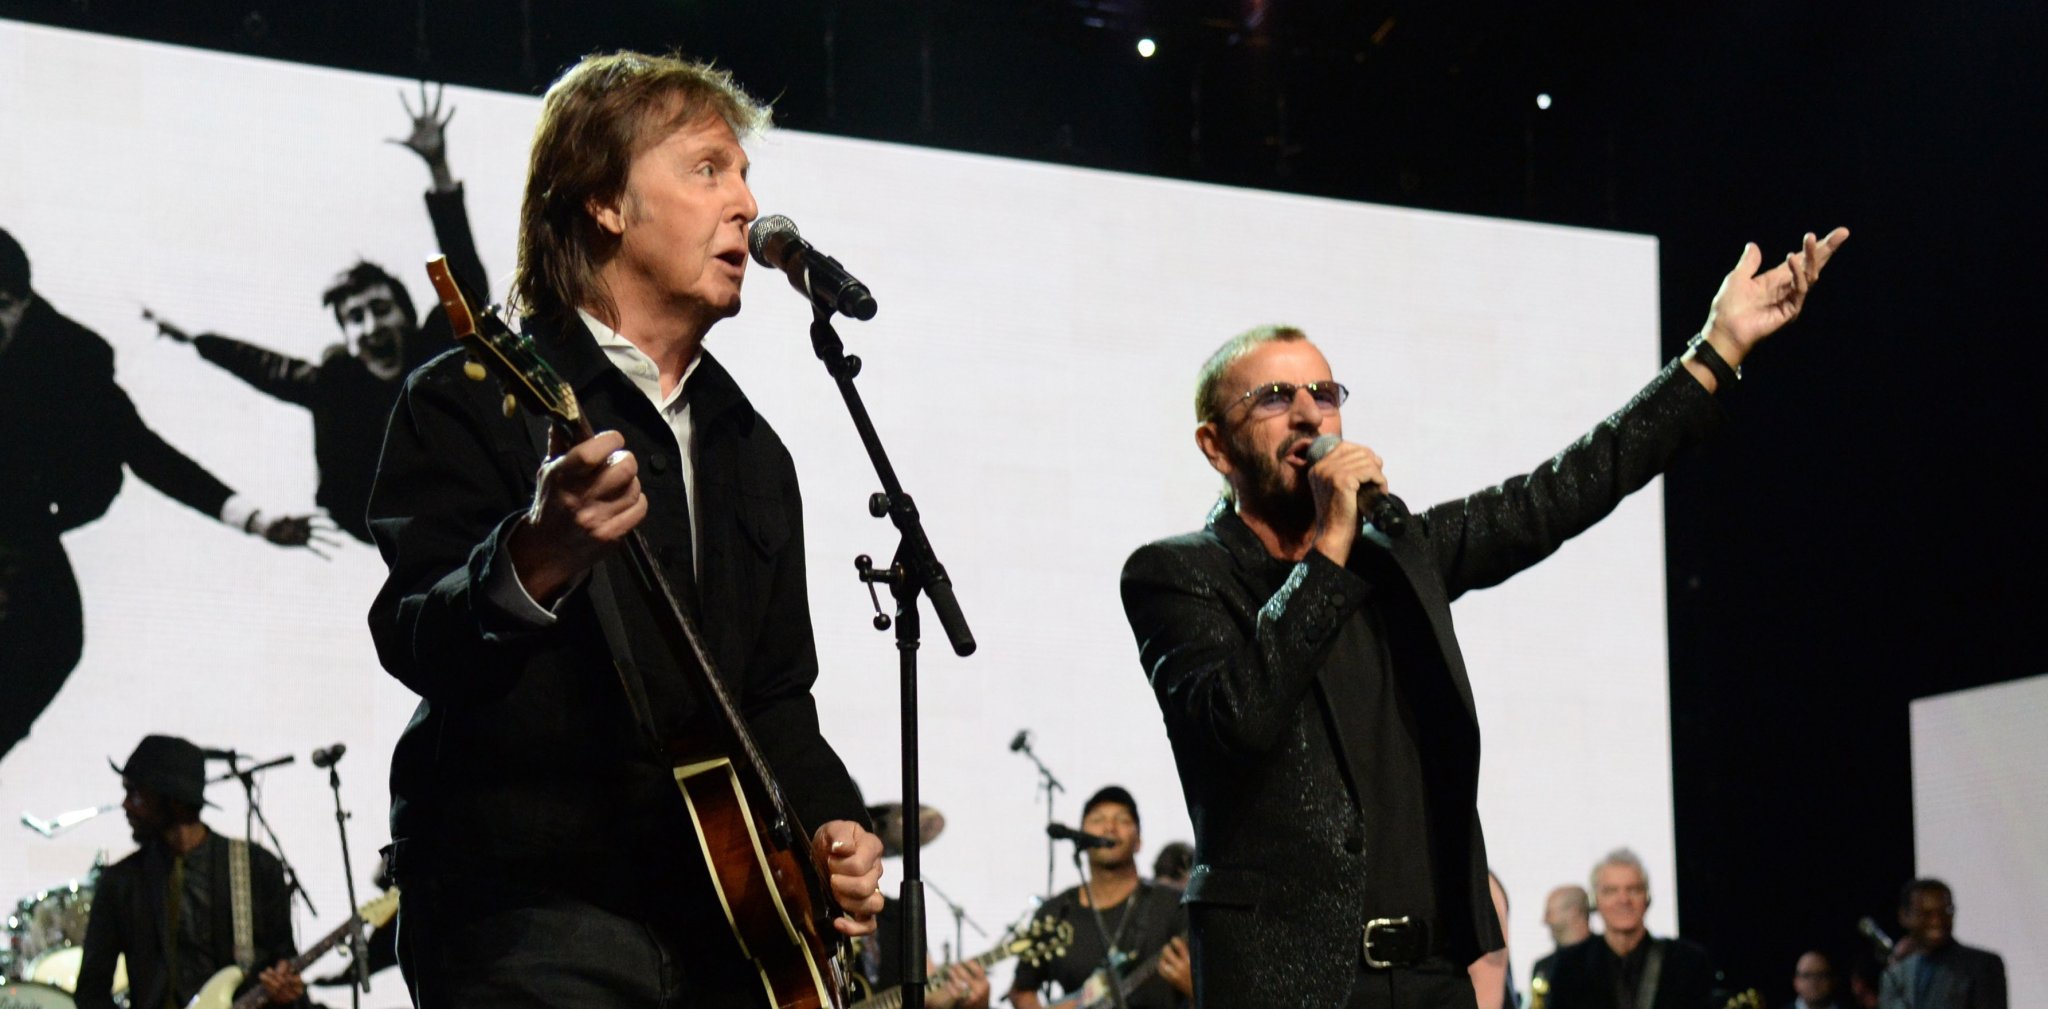 Watch Paul McCartney Bring Out Ringo Starr to Play Beatles Classics in L.A.